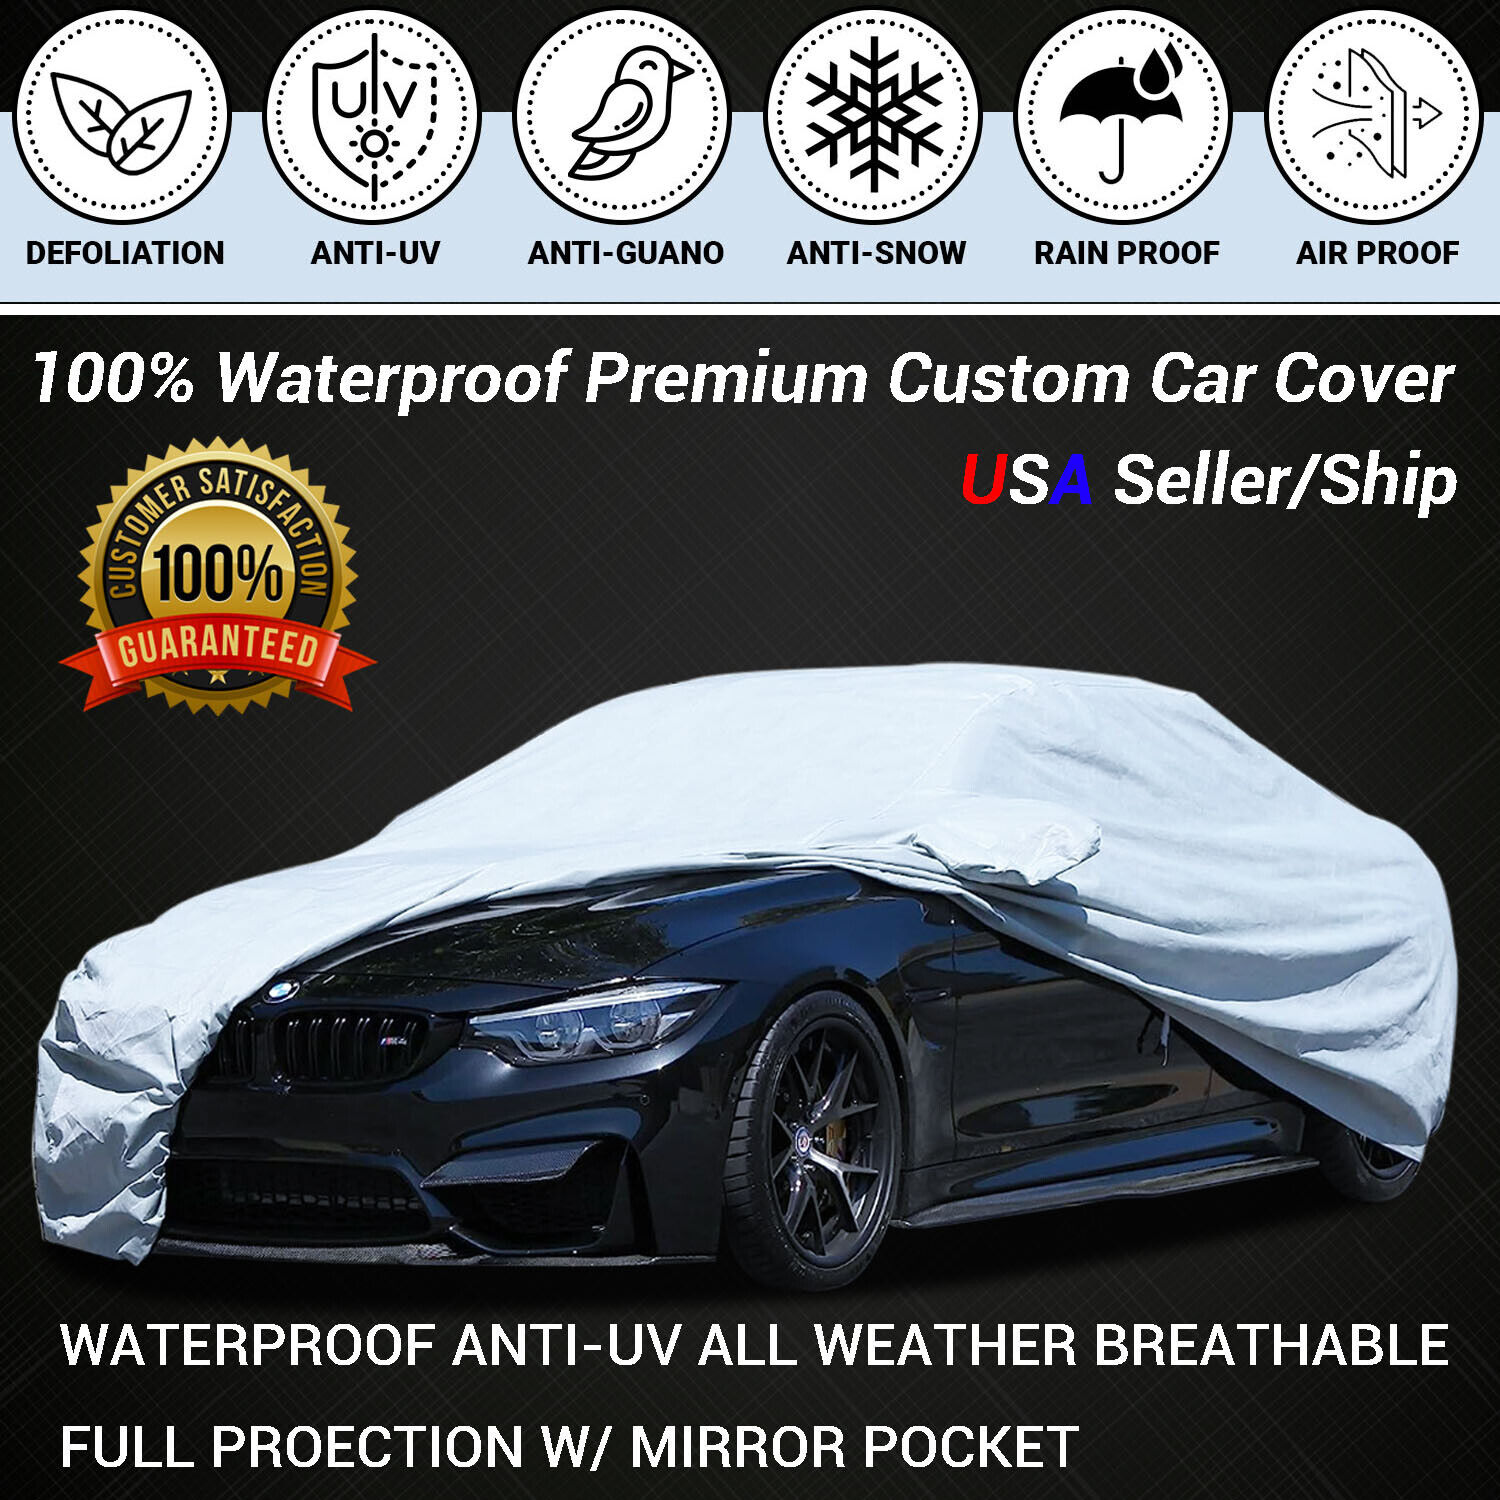 NEW Waterproof Protection Custom Car Cover For 2004 2005 2006 - 2011 Mazda RX-8